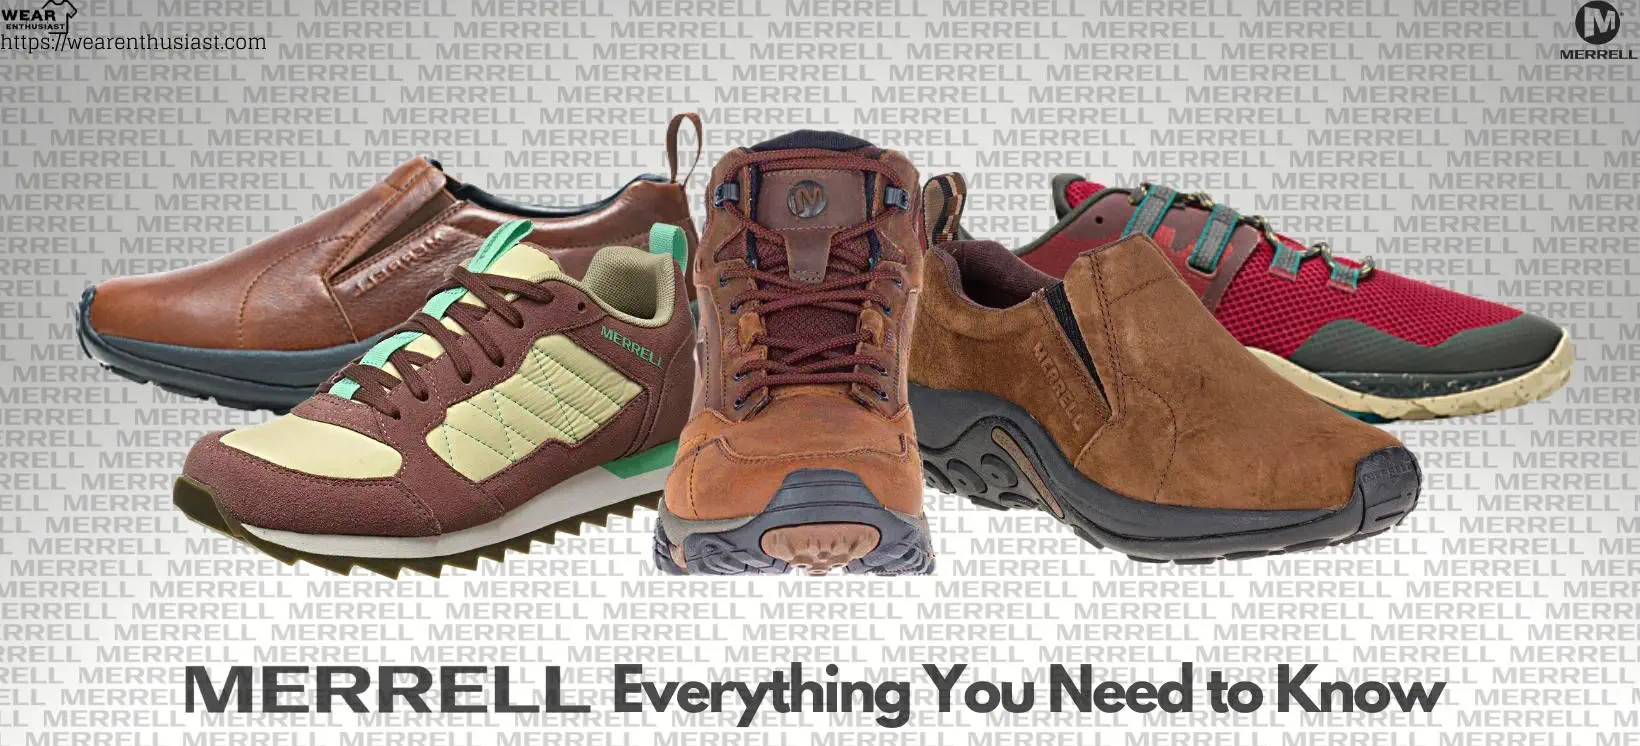 Merrell Everything You Need to Know